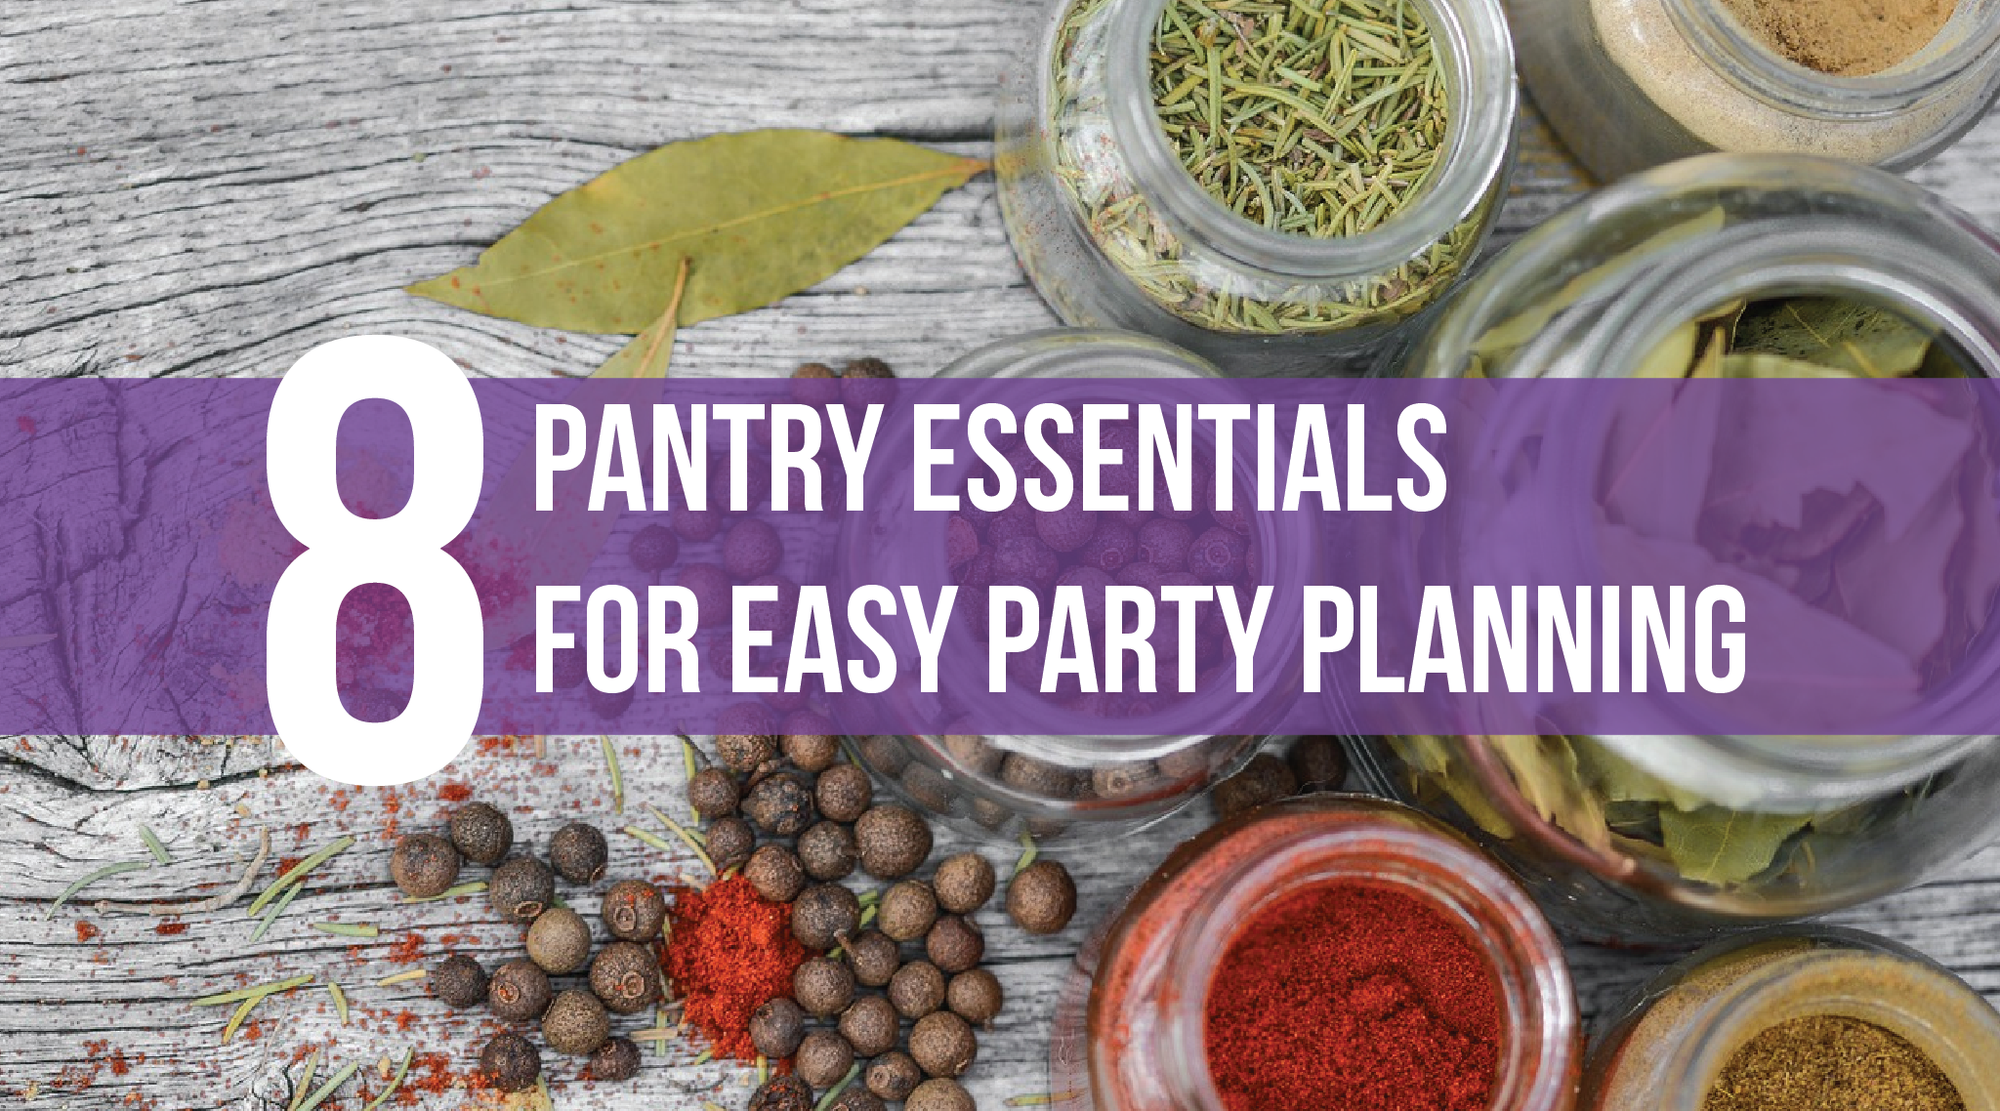 8 Pantry Essentials for Easy Party Planning